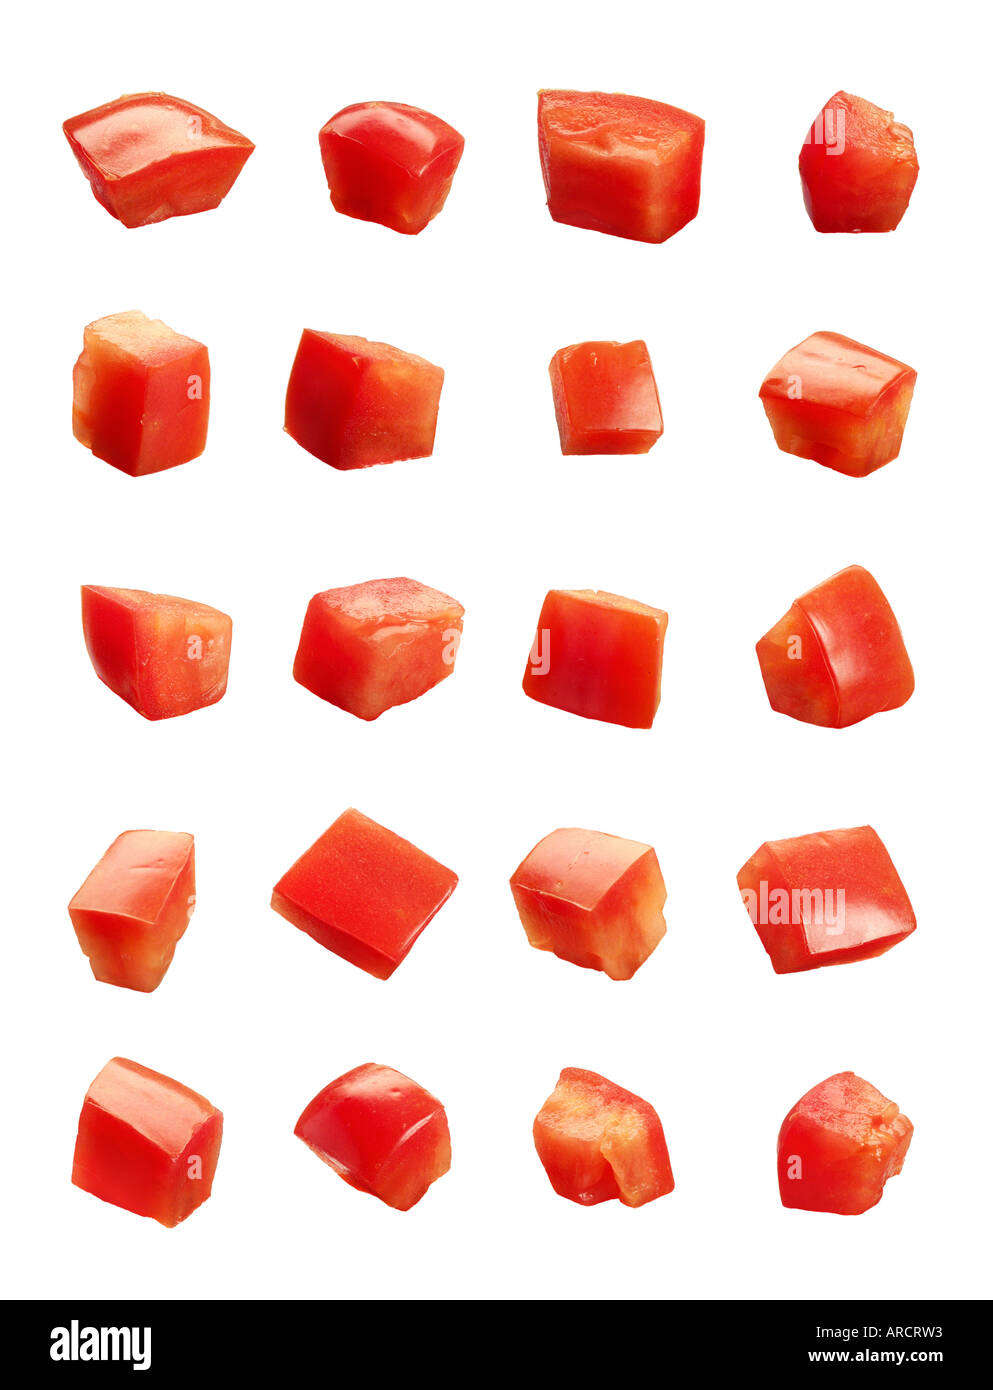 Diced Tomatoes Isolated Stock Photo